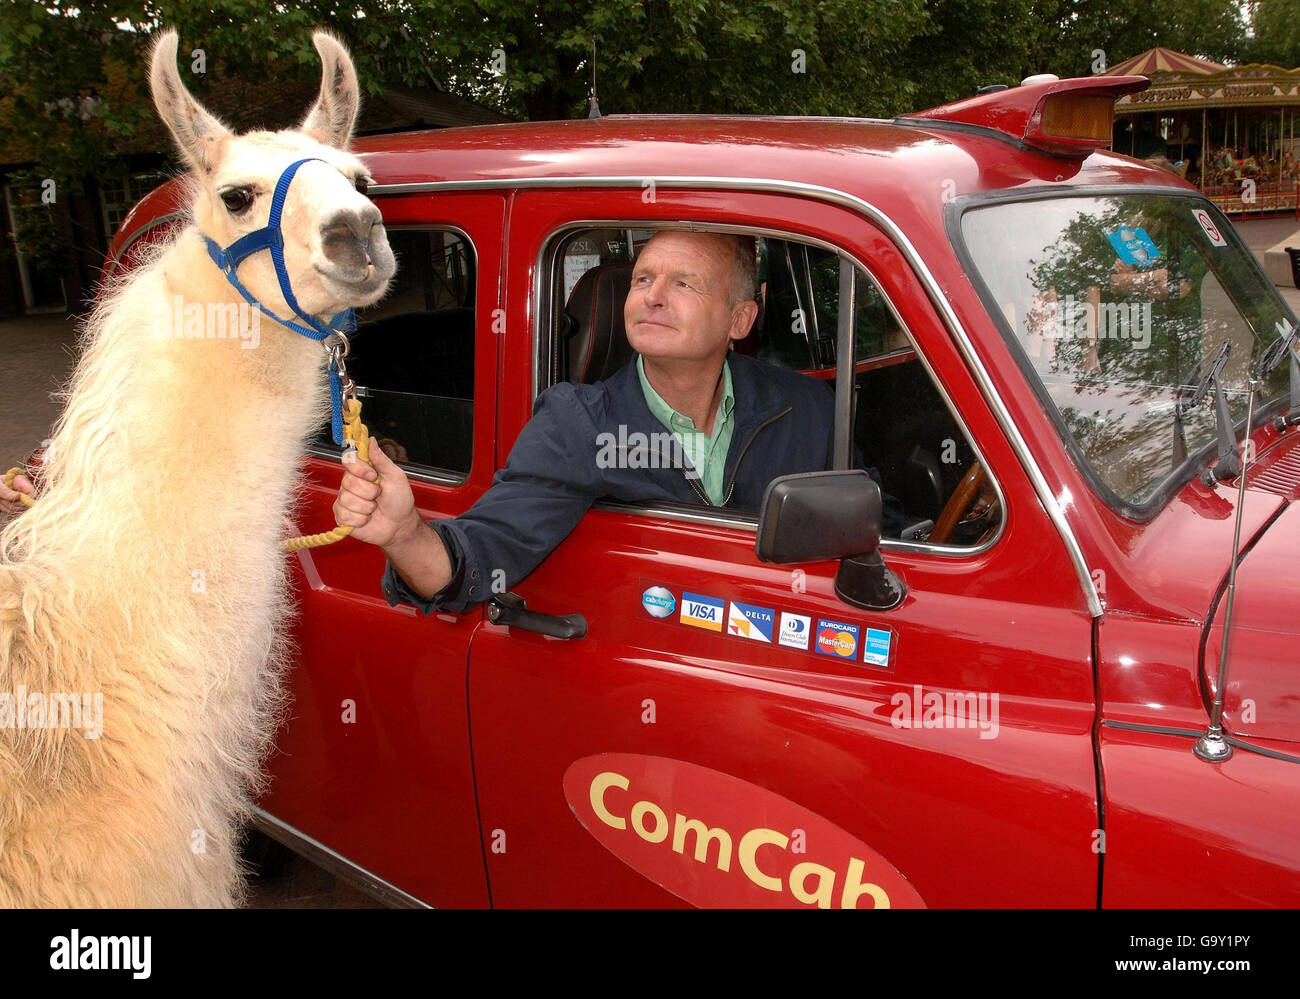 Perry an 8-year-old South American Llama, with Tony Ellis a London Taxi driver at London Zoo in Regents Park, where there was a photocall to promote a free weekend for licensed cab drivers and their families at the zoo this coming weekend. Stock Photo